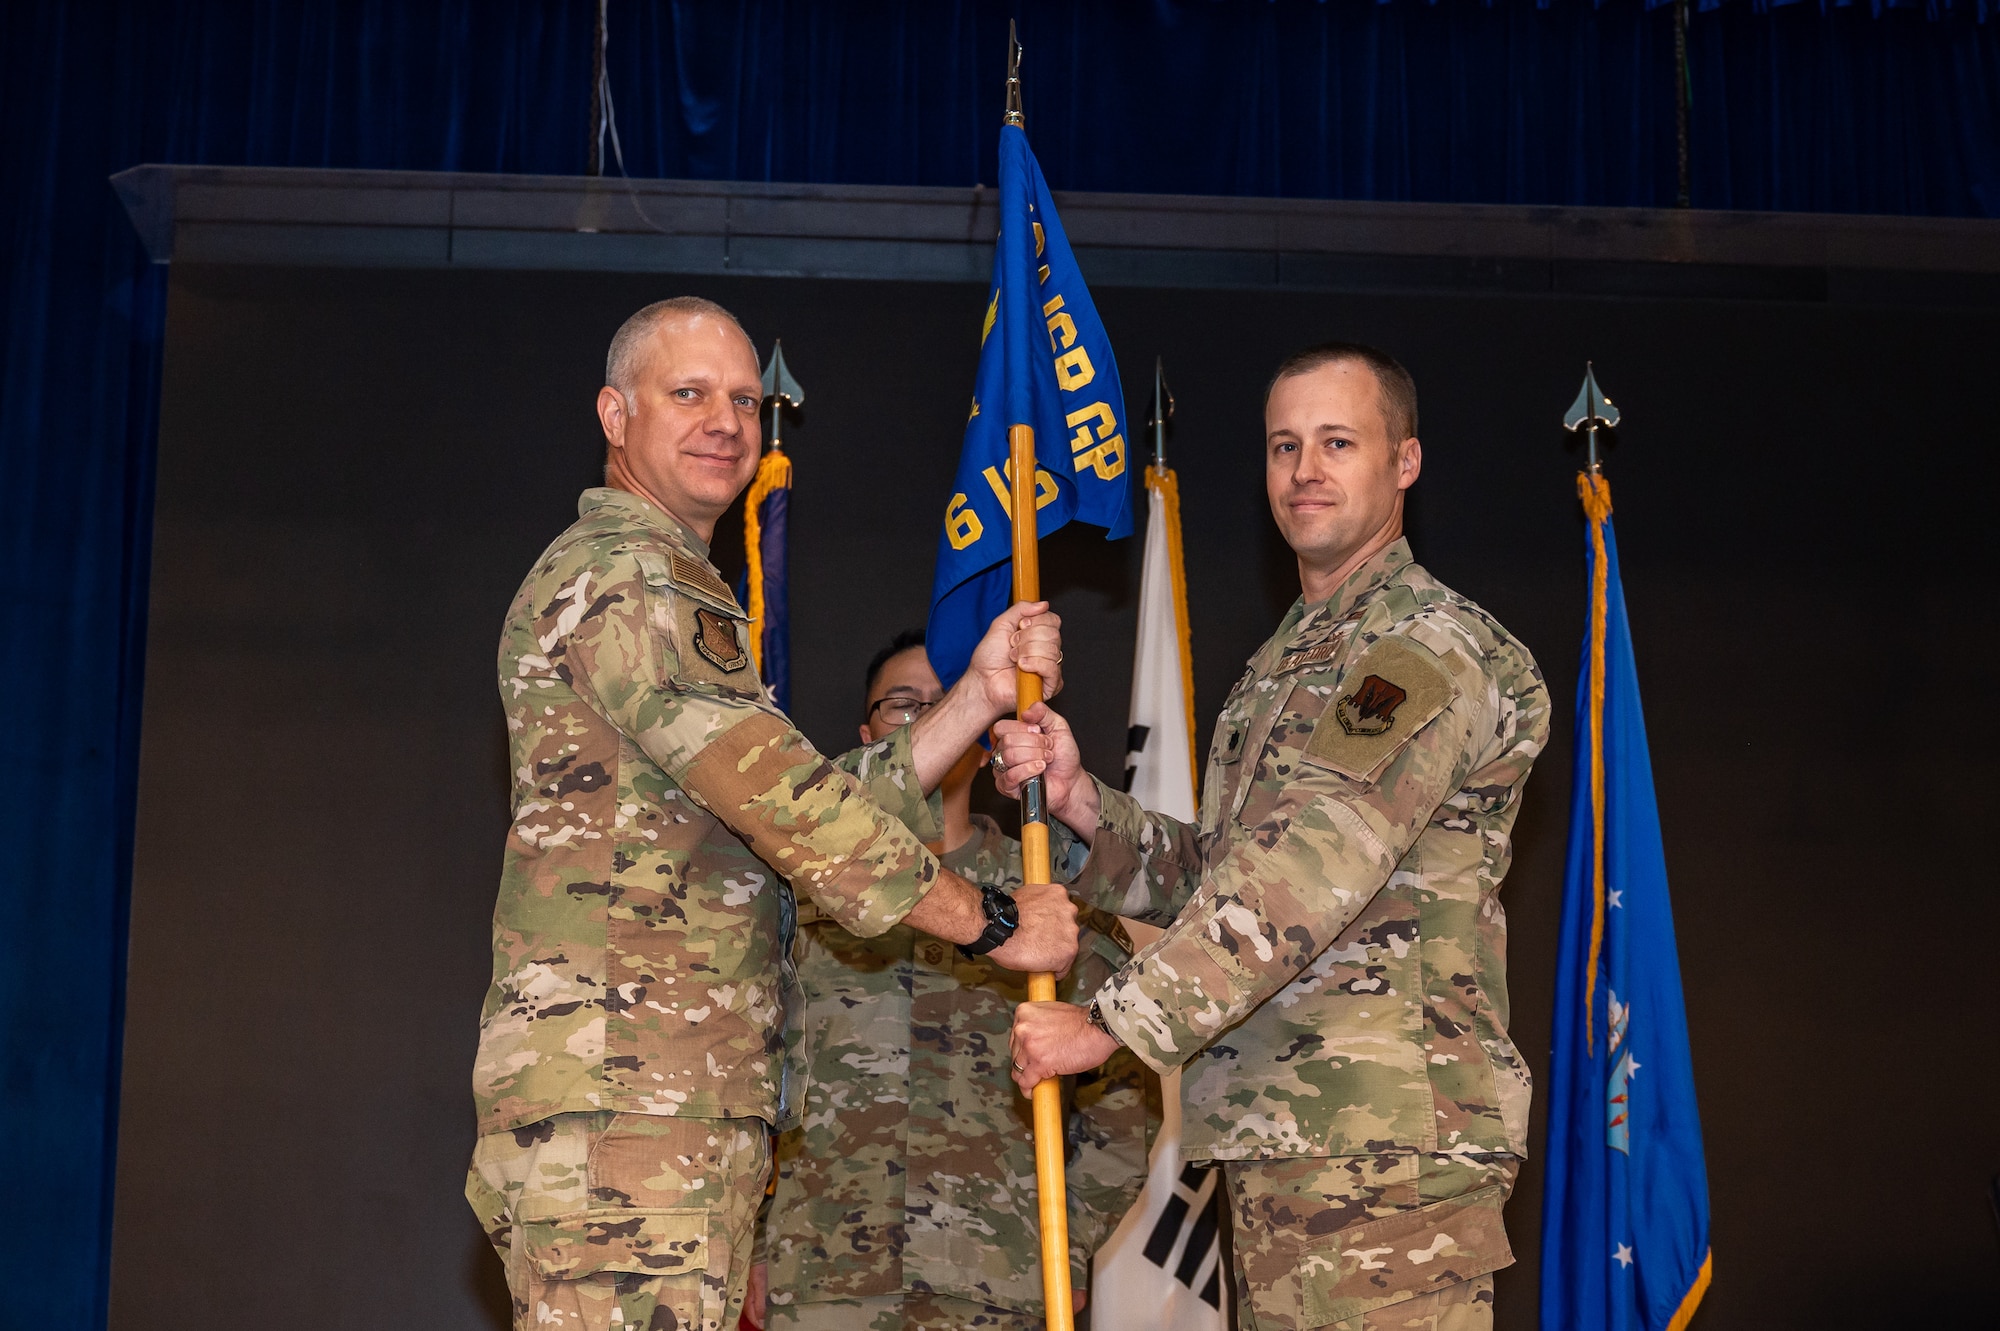 U.S. Air Force Lt. Col. Jarrod Knapp, left, 694th Intelligence, Surveillance, and Reconnaissance group deputy commander, passes the guidon to Lt. Col. Adam Fossum, 6th Intelligence Squadron incoming commander, at Osan Air Base, Republic of Korea, June 14, 2023. Prior to his current assignment, Fossum was the Director for Plans, Programs, and Analyses, Seventh Air Force, and during temporary duty service, stood up the Office of Defense Cooperation Palau. (U.S. Air Force photo by Senior Airman Thomas Sjoberg)